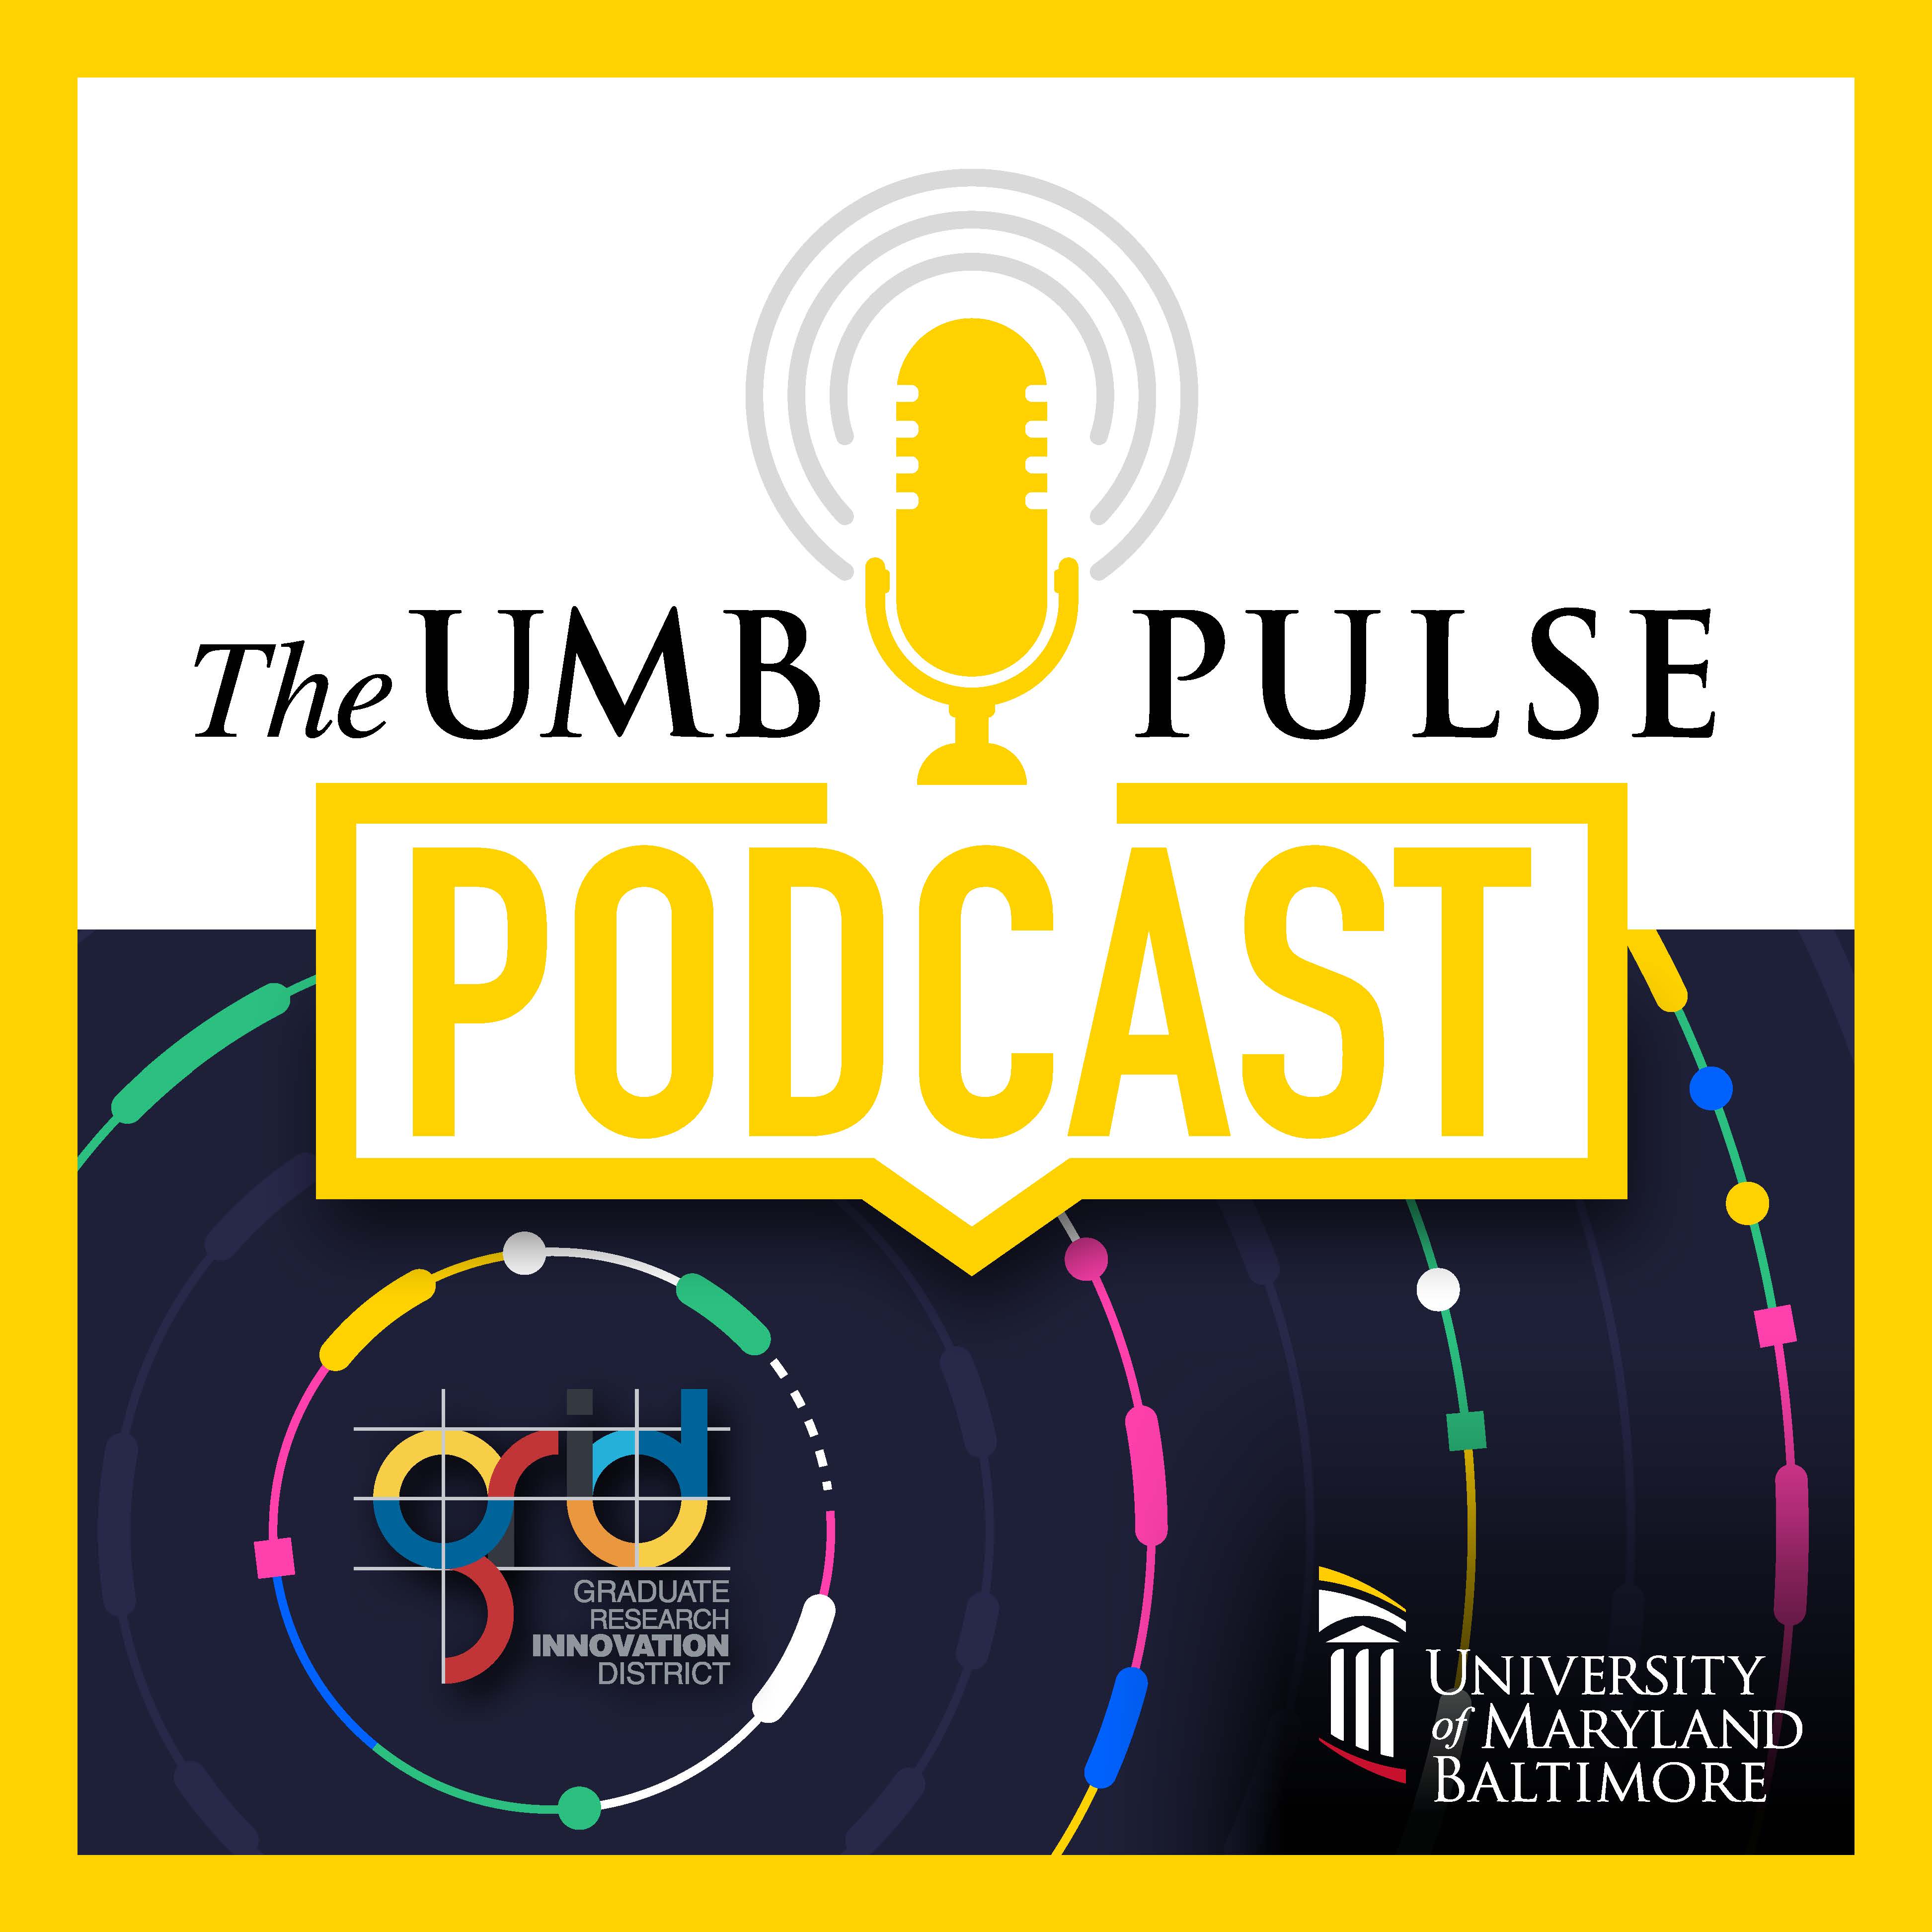 The UMB Pulse Podcast